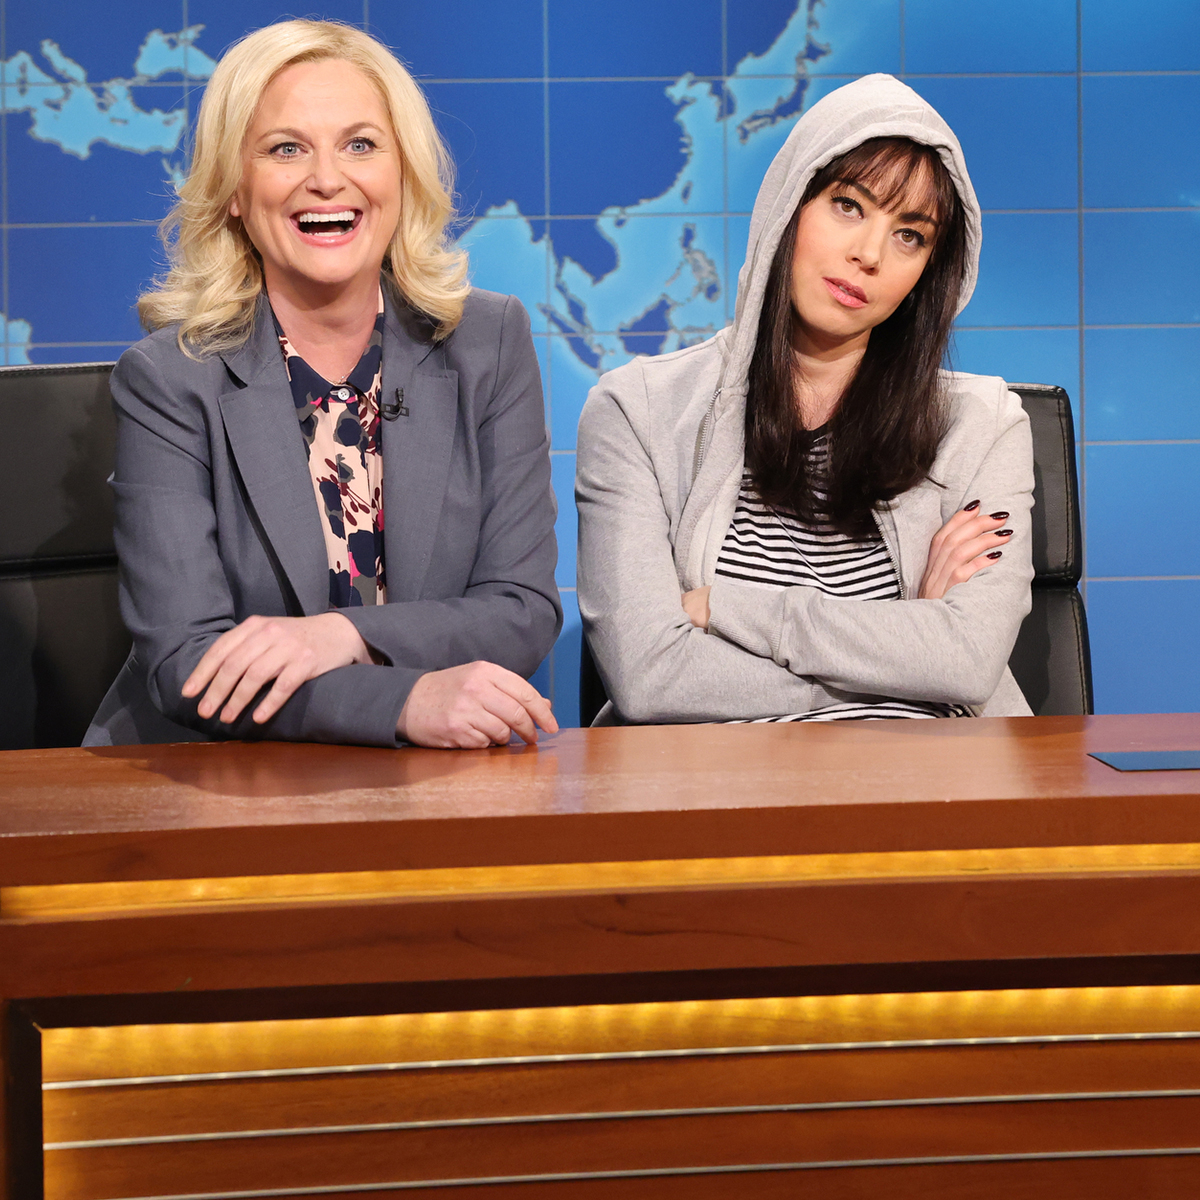 Aubrey Plaza Showed Her Range on Star-Studded 'SNL' Featuring Amy Poehler,  Tony Hawk and More January 21, 2023